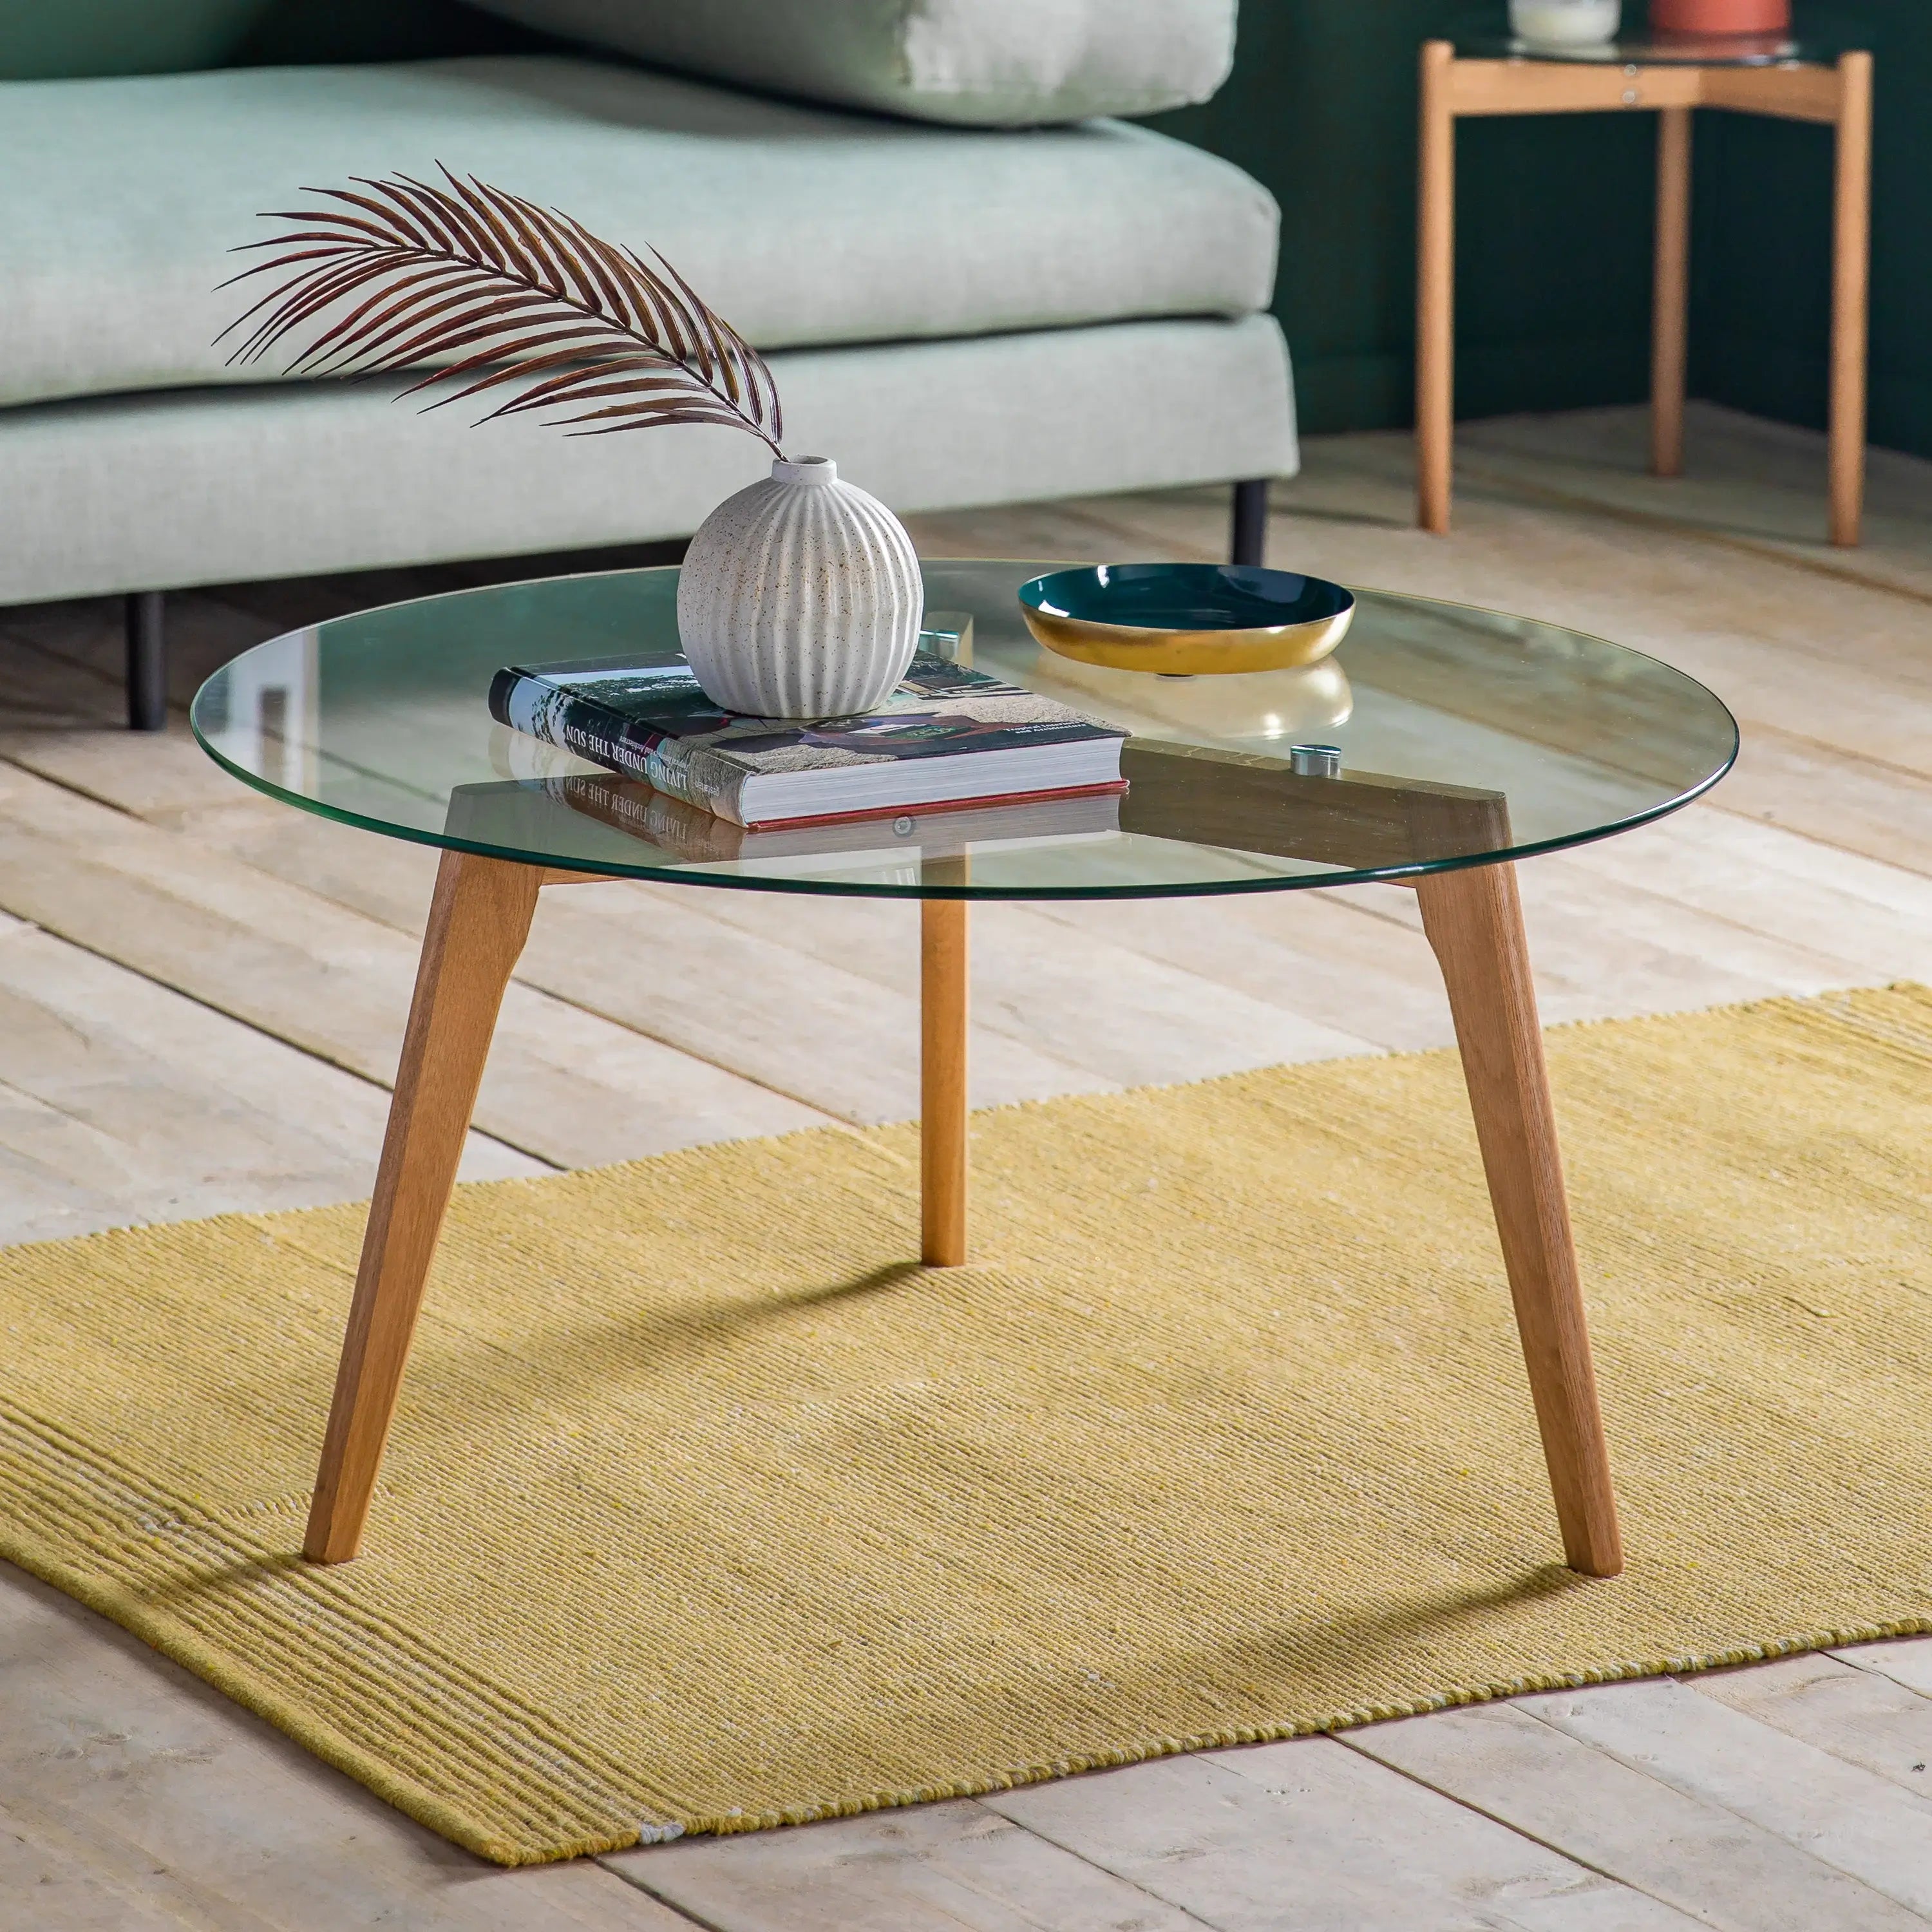 Jack round glass coffee table in natural oak with clear glass | MalletandPlane.com